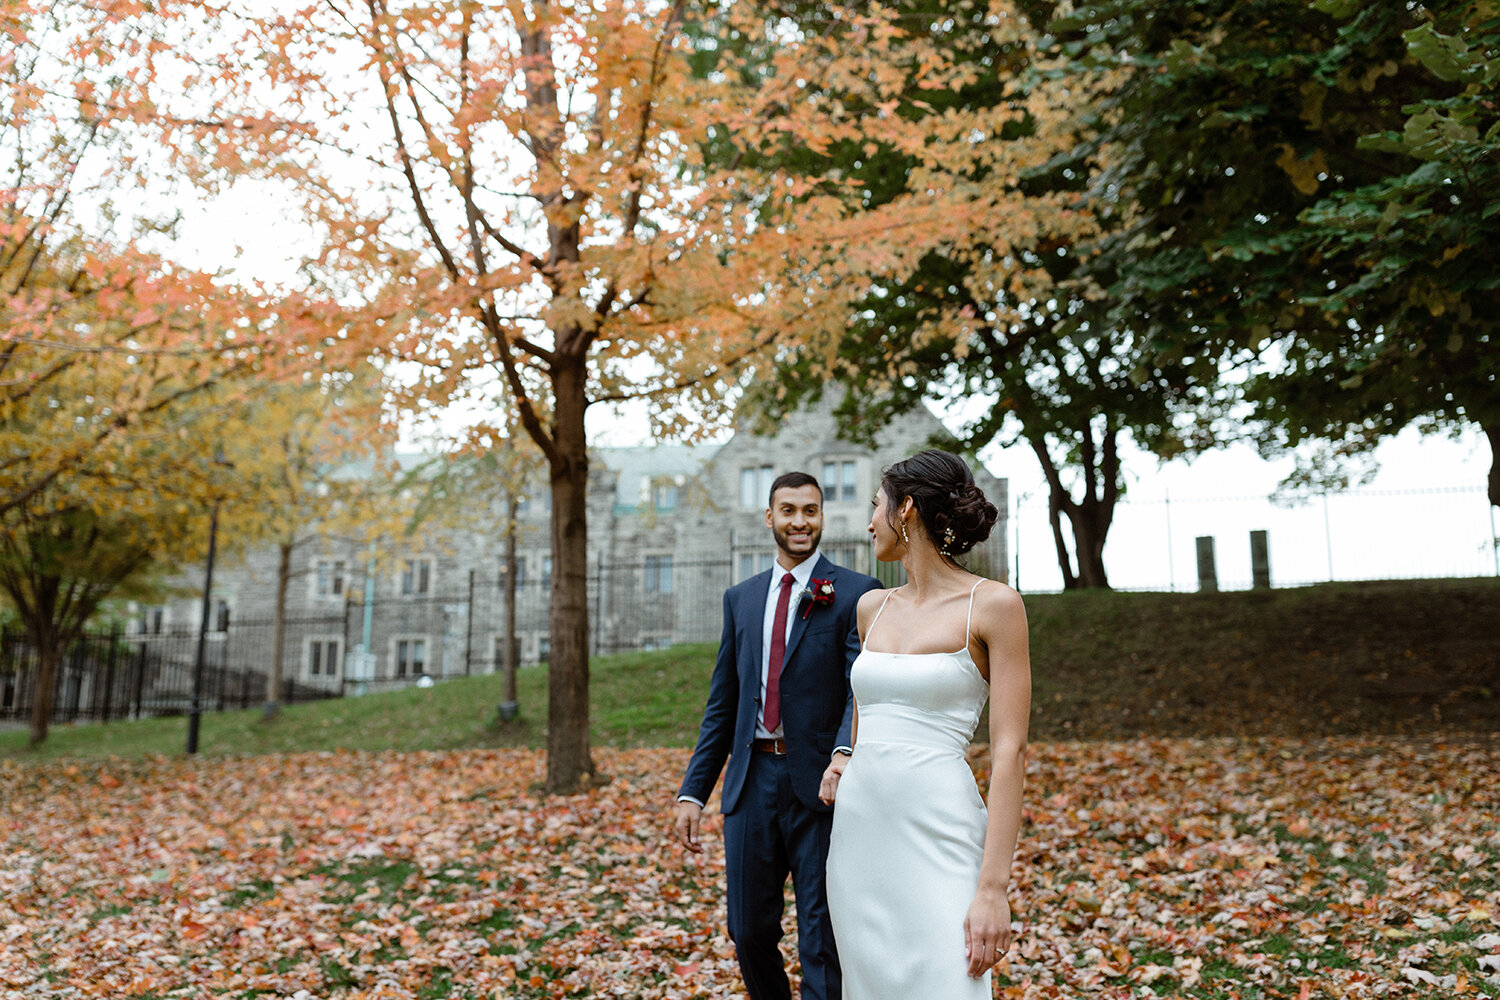 Small-Intimate-Elopement-Downtown-Toronto-U-of-T-Vows-where-to-elope-in-toronto-25.JPG